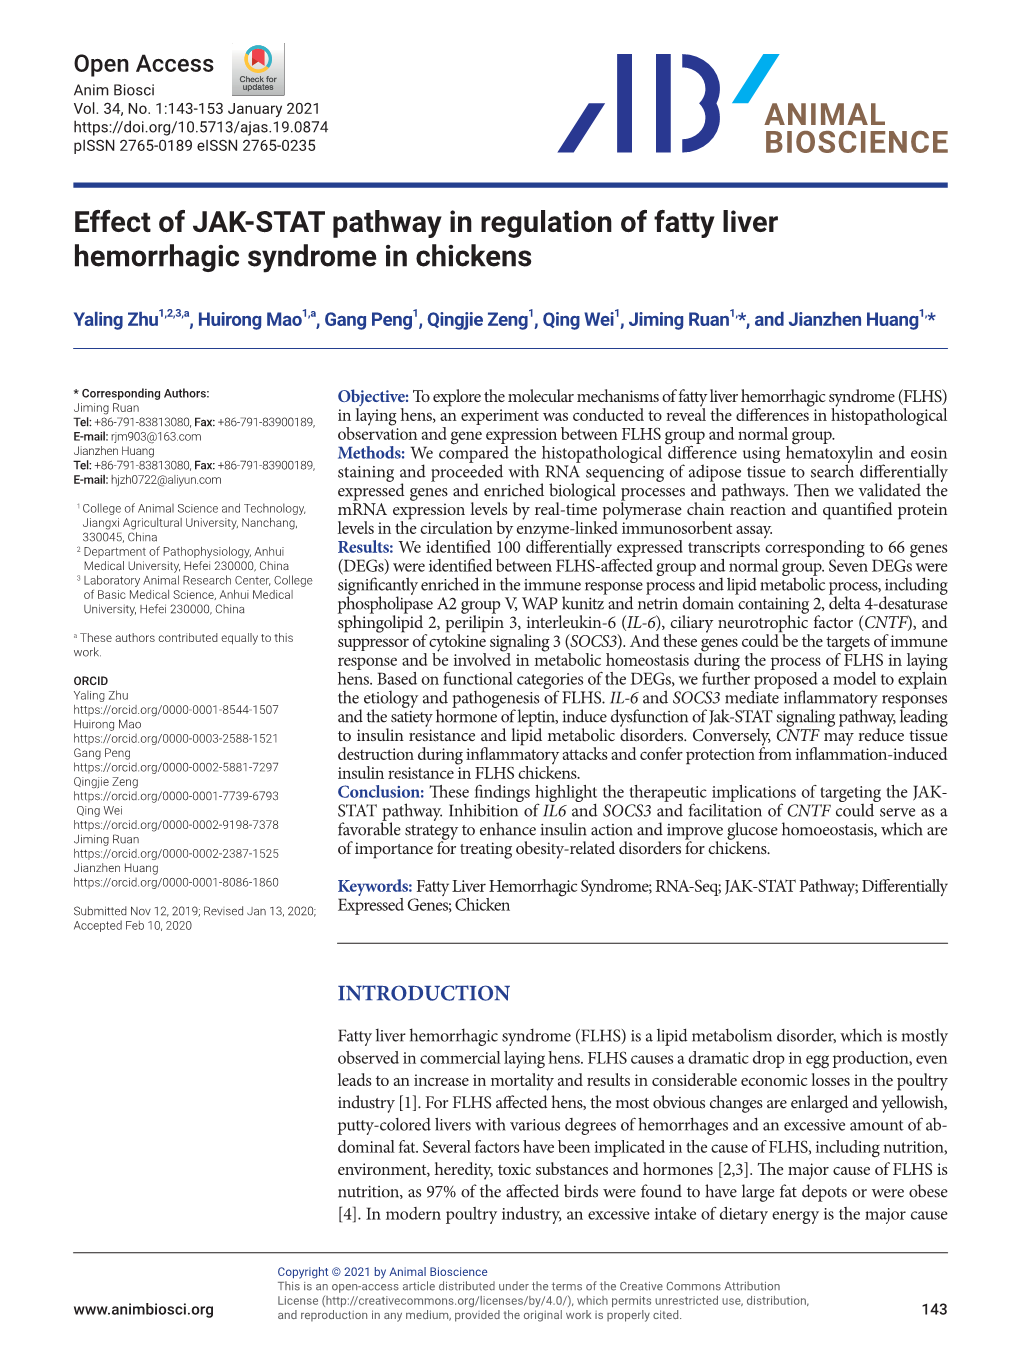 Effect of JAK-STAT Pathway in Regulation of Fatty Liver Hemorrhagic Syndrome in Chickens